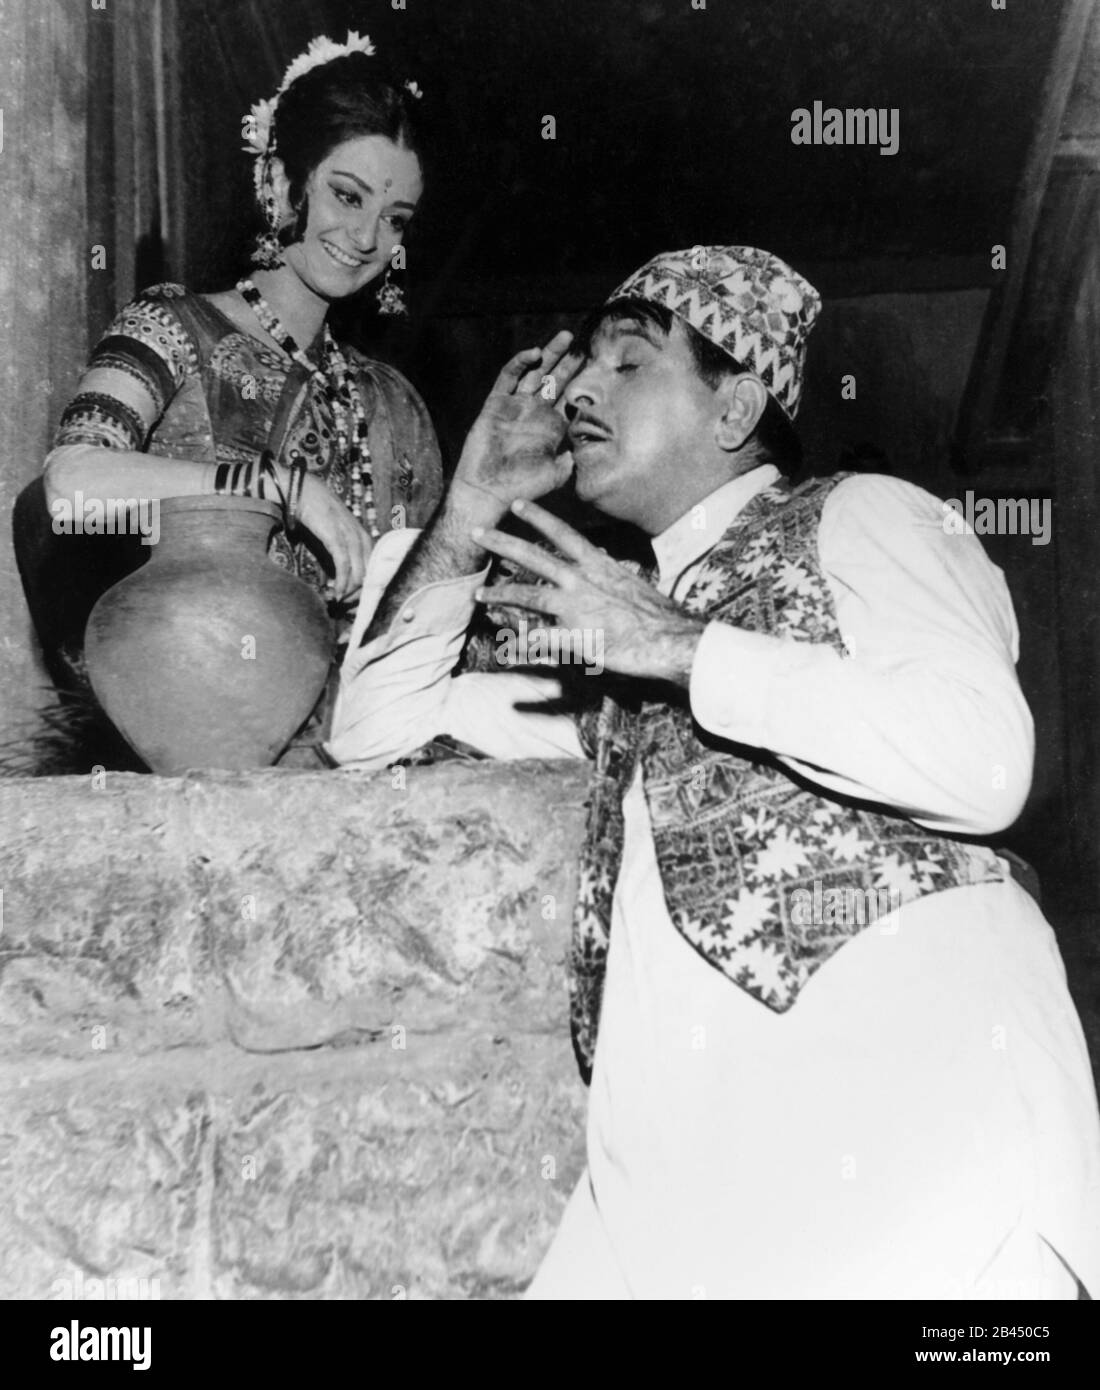 Dilip Kumar, Mohammed Yusuf Khan, Indian actor, The Tragedy King, The First Khan, actress, Saira Banu, Saira Bano, India, Asia, old vintage 1900s picture Stock Photo